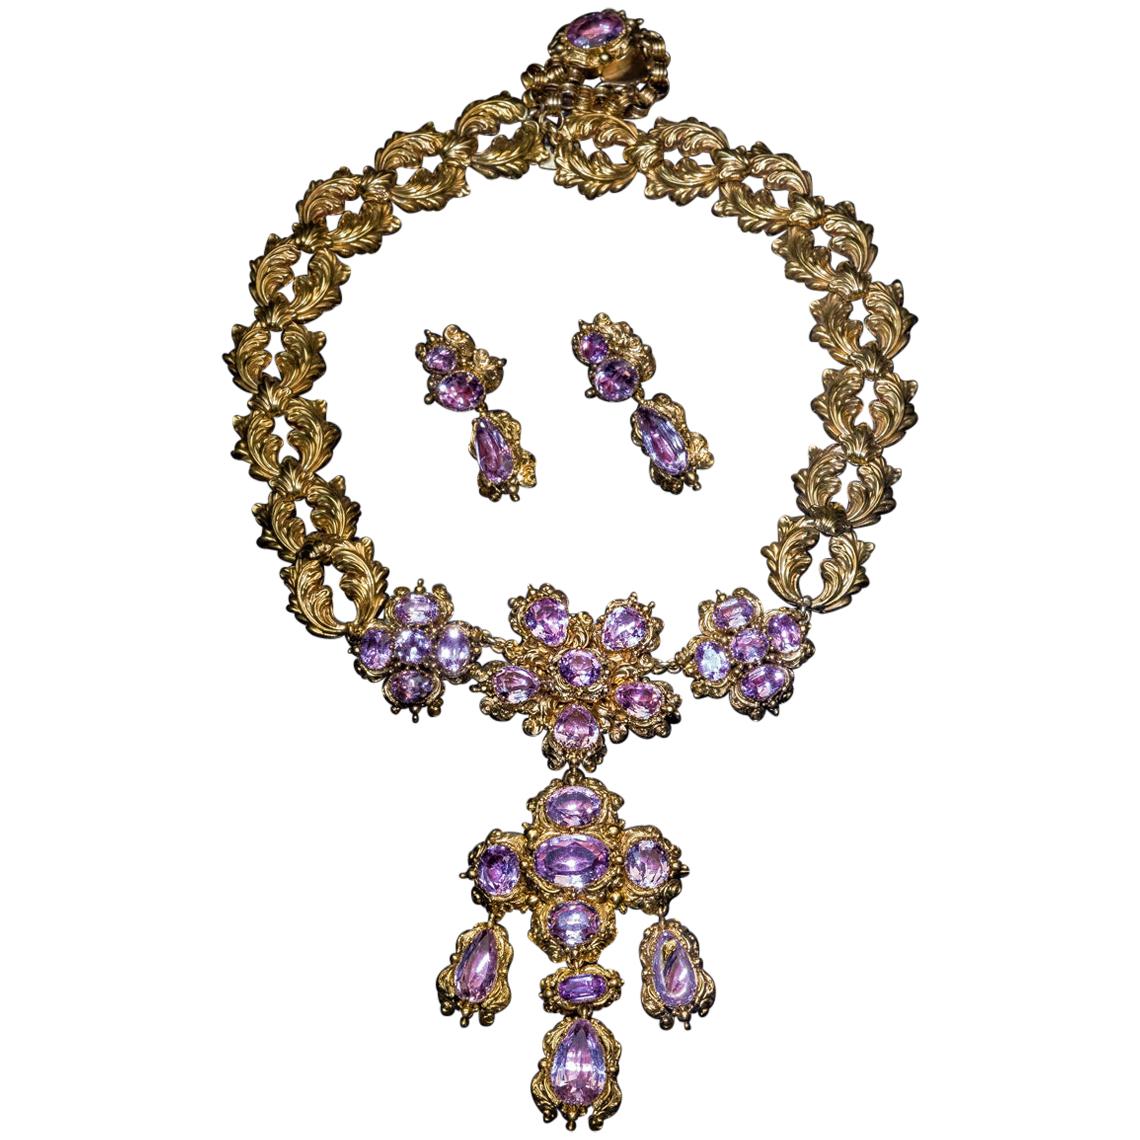 Antique Georgian Era Pink Topaz Gold Necklace and Earrings